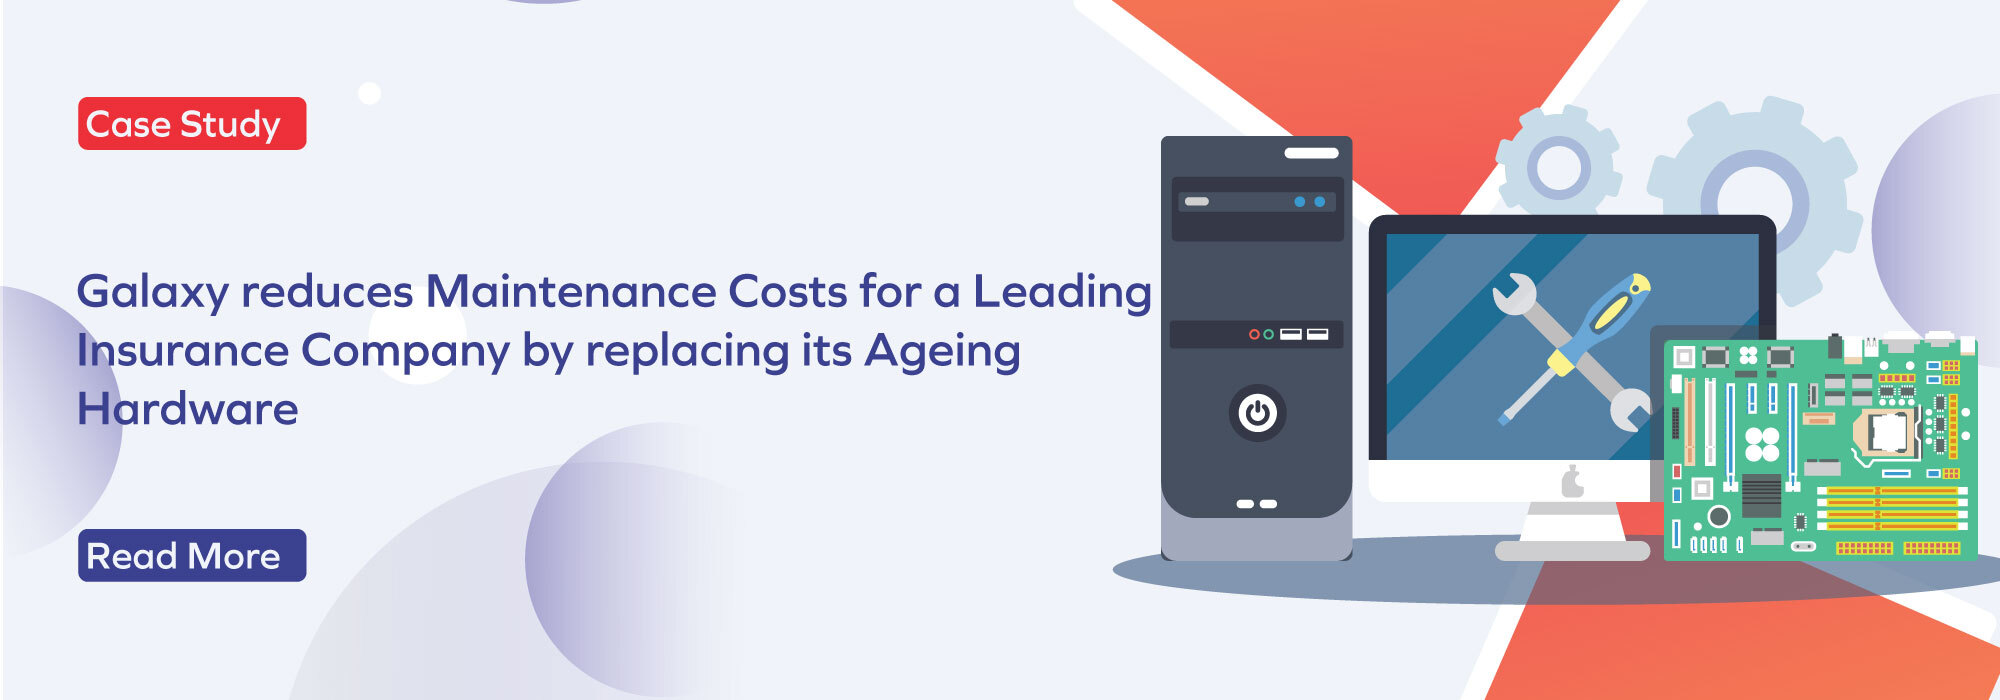 Insurance company reduces maintenance costs by replacing its ageing hardware